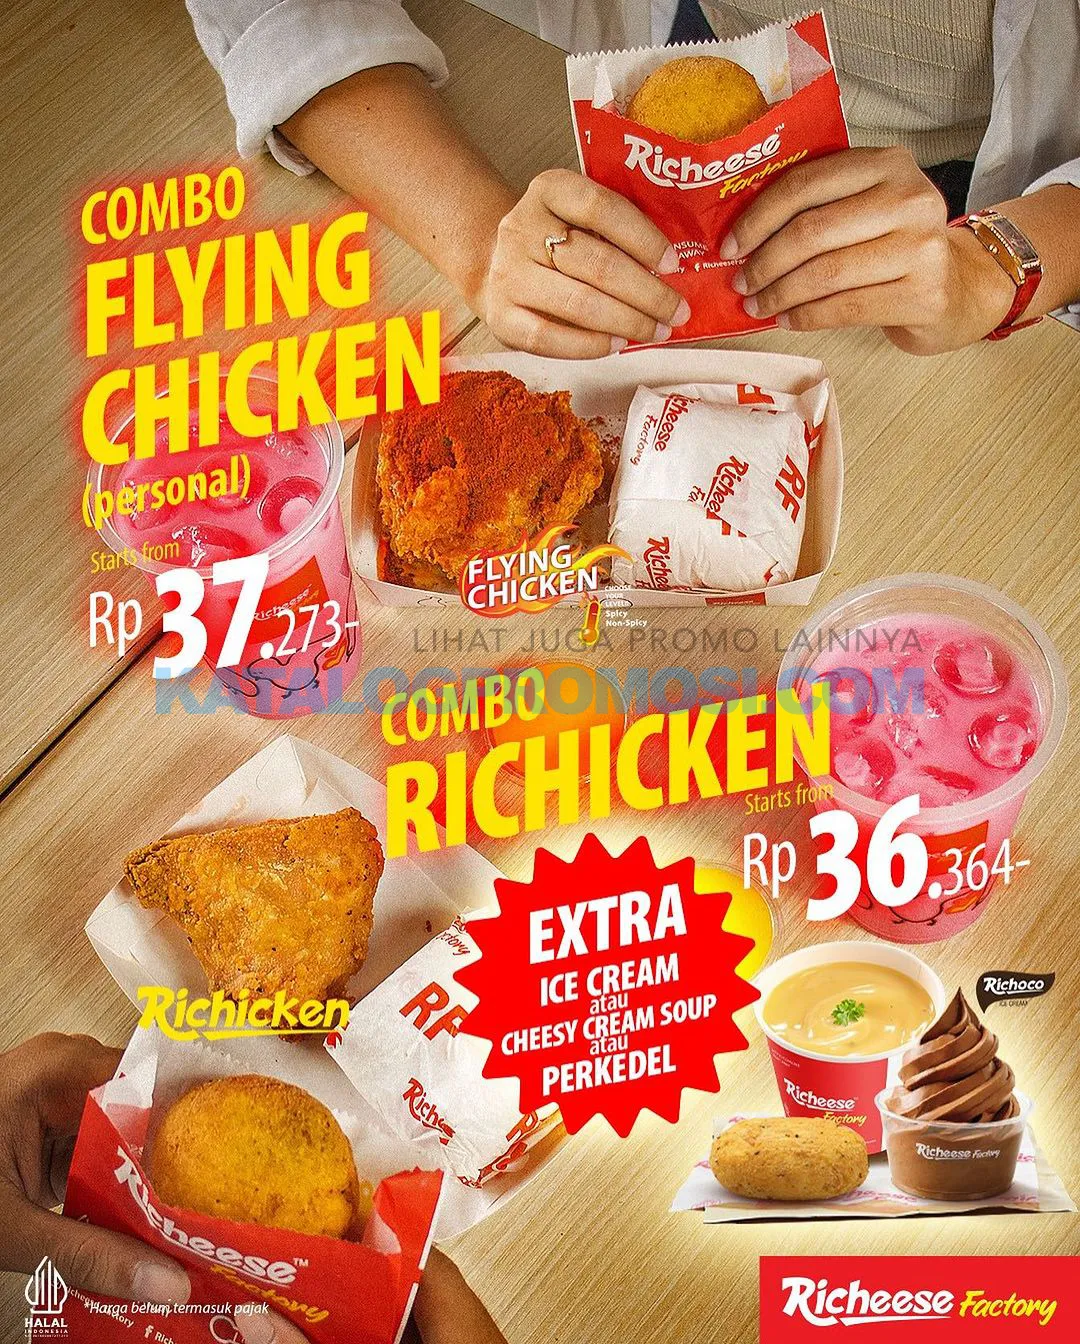 Promo RICHEESE FACTORY GRATIS EXTRA SIDE DISH